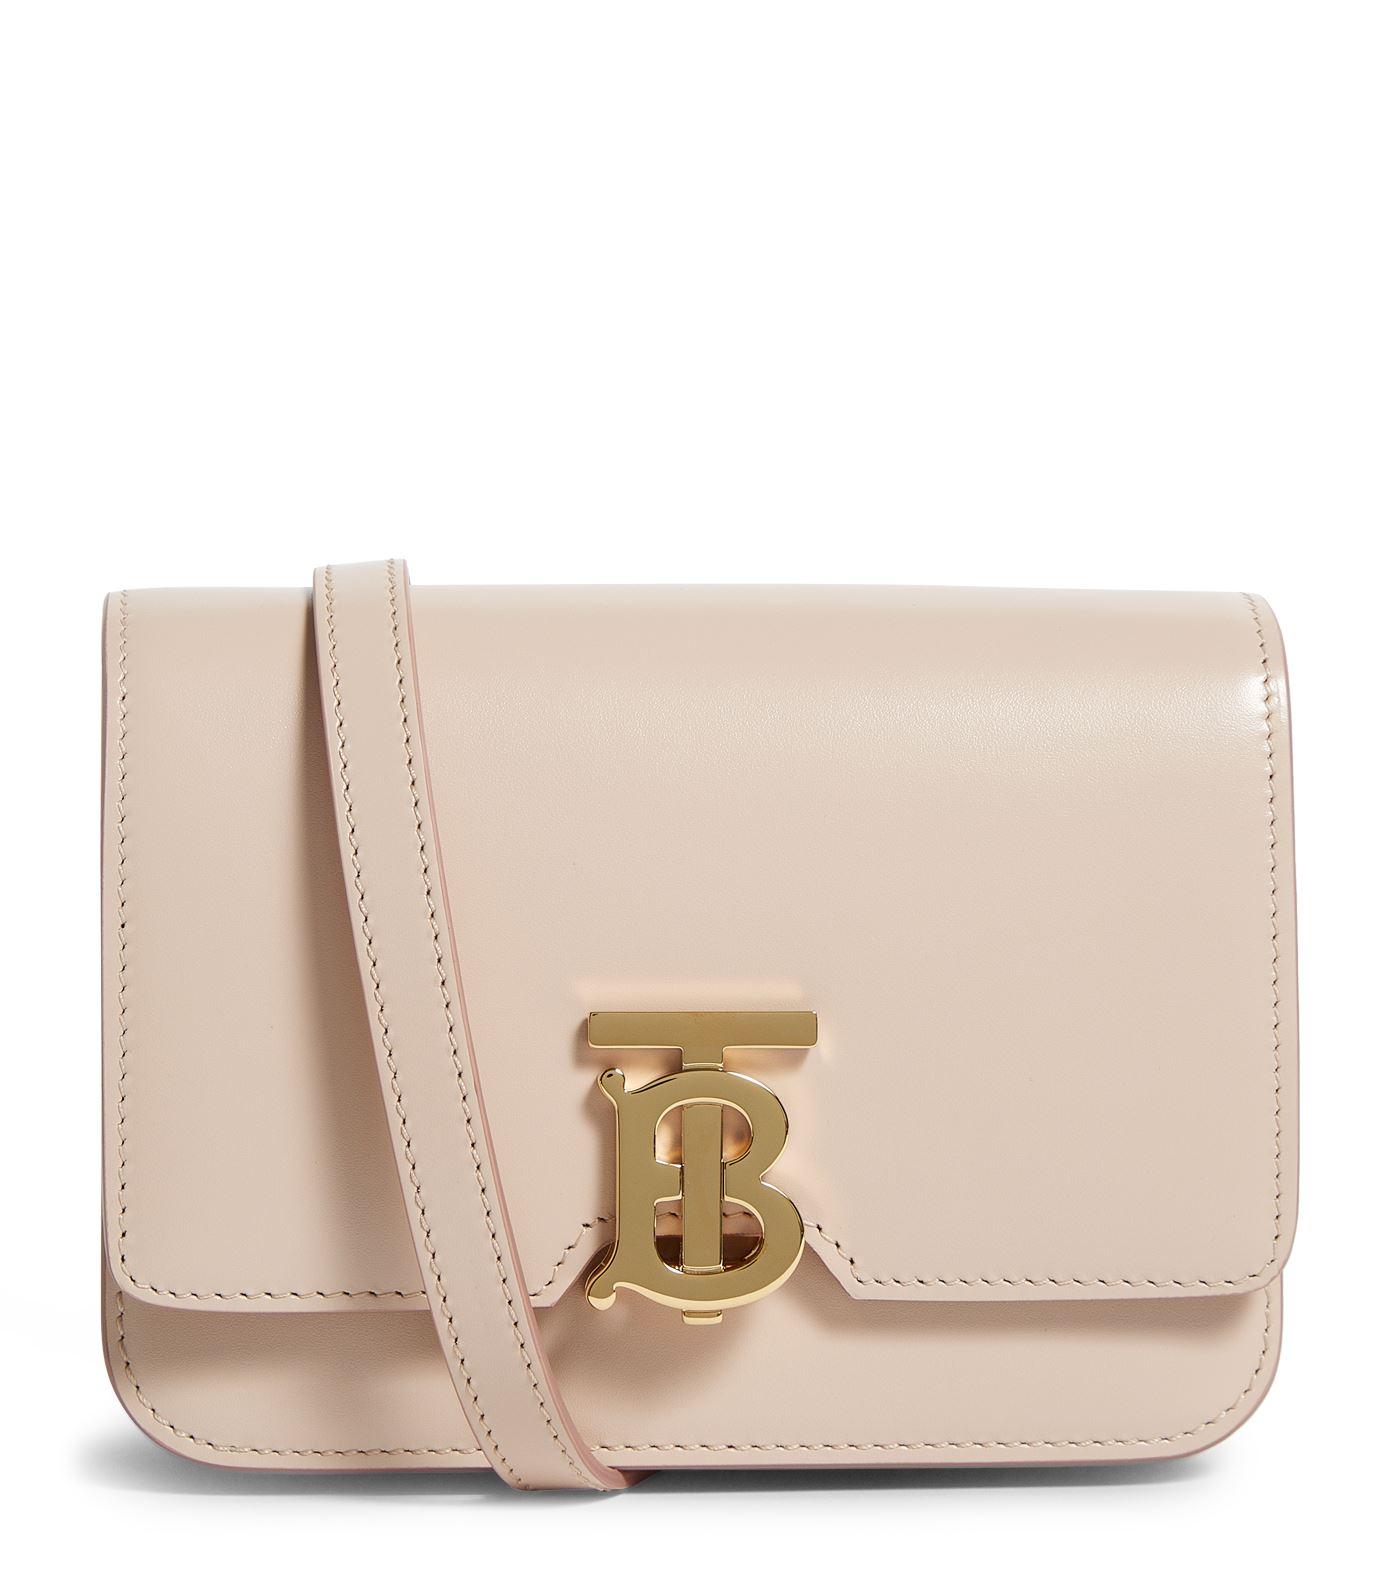 Burberry Small Leather Tb Bag in Pink - Lyst